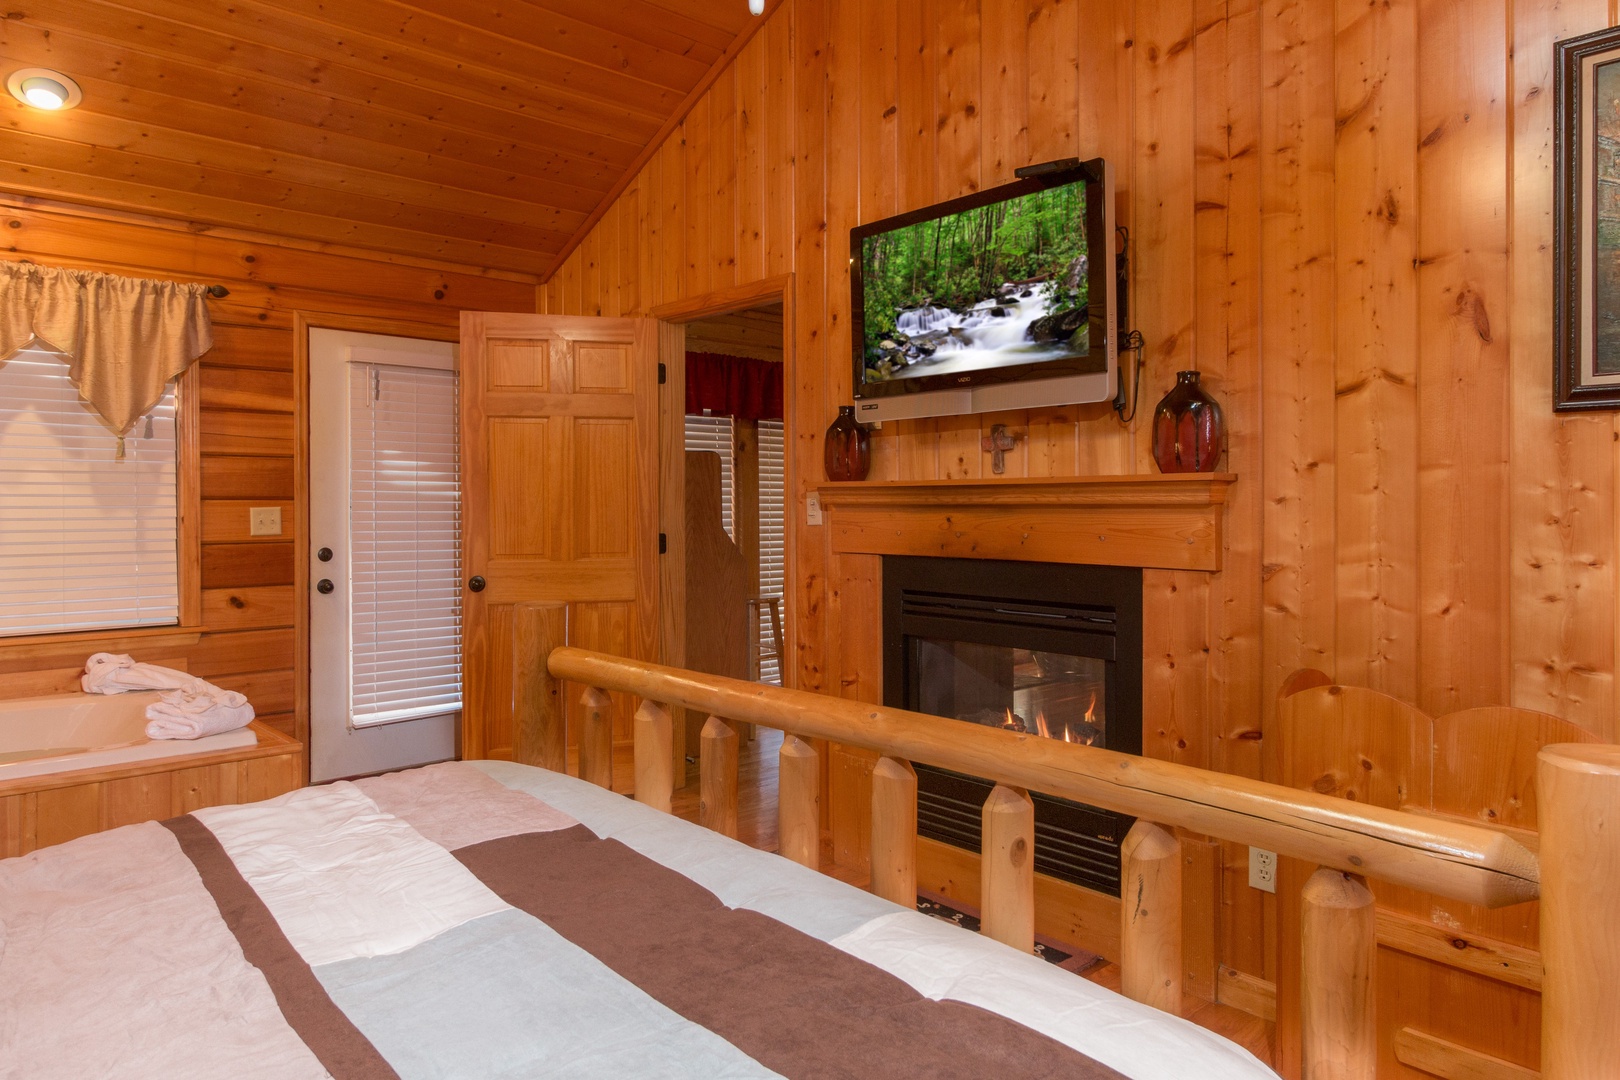 Fireplace and TV in a bedroom at A Beary Cozy Escape, a 1 bedroom cabin rental located in Pigeon Forge